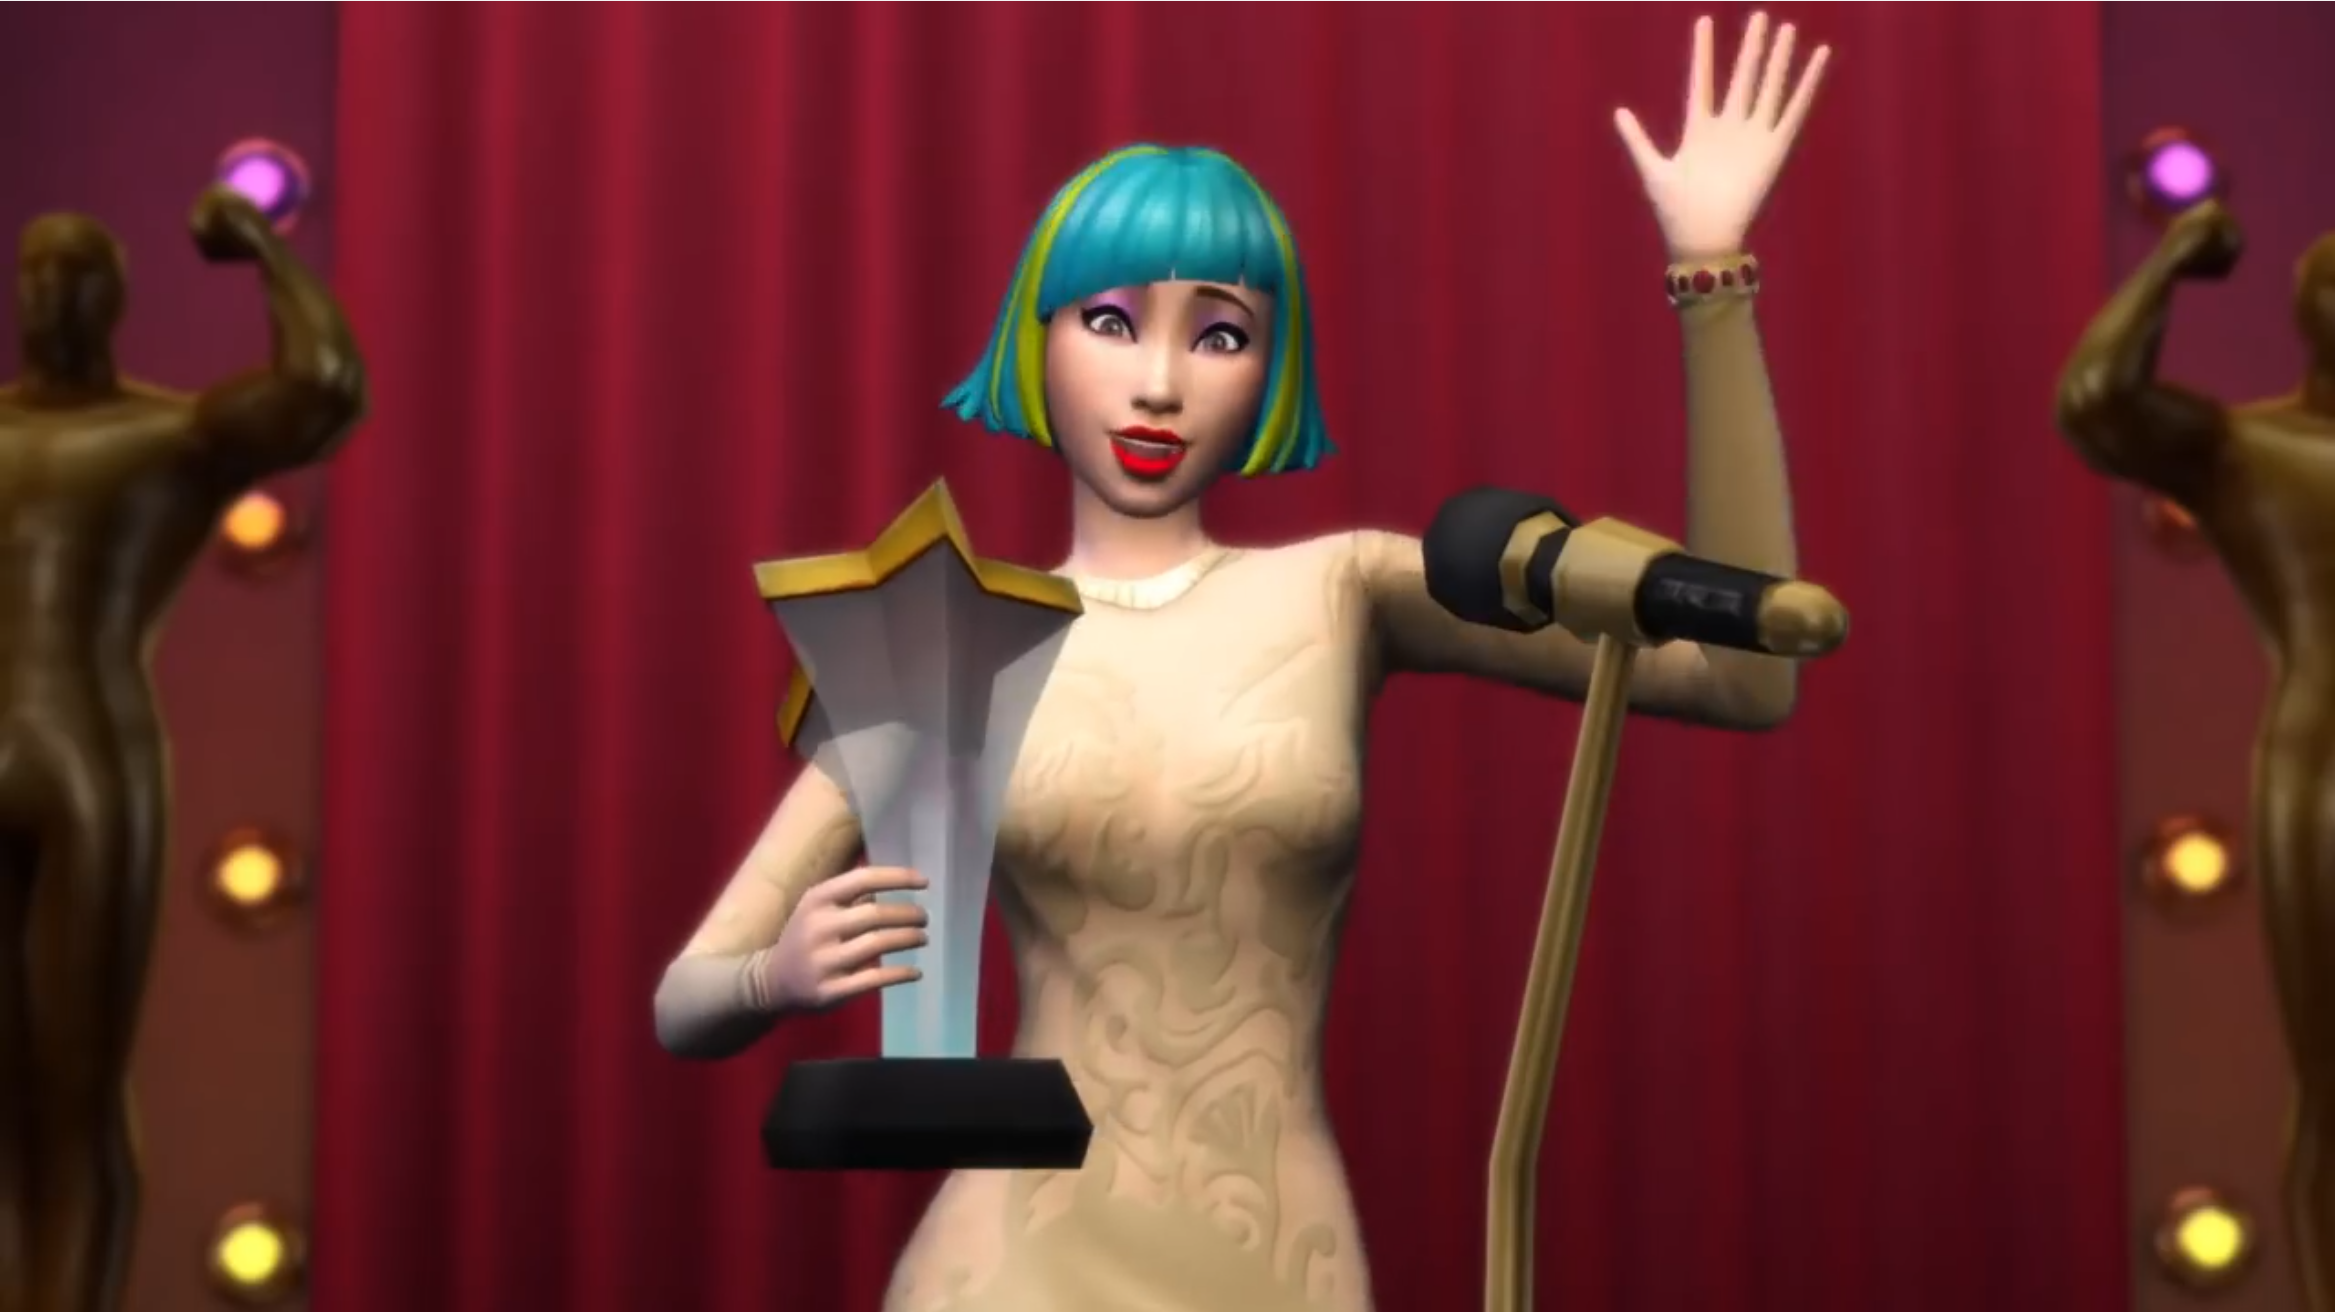 An Actor in The Sims 4 Get Famous Expansion accepts an award.